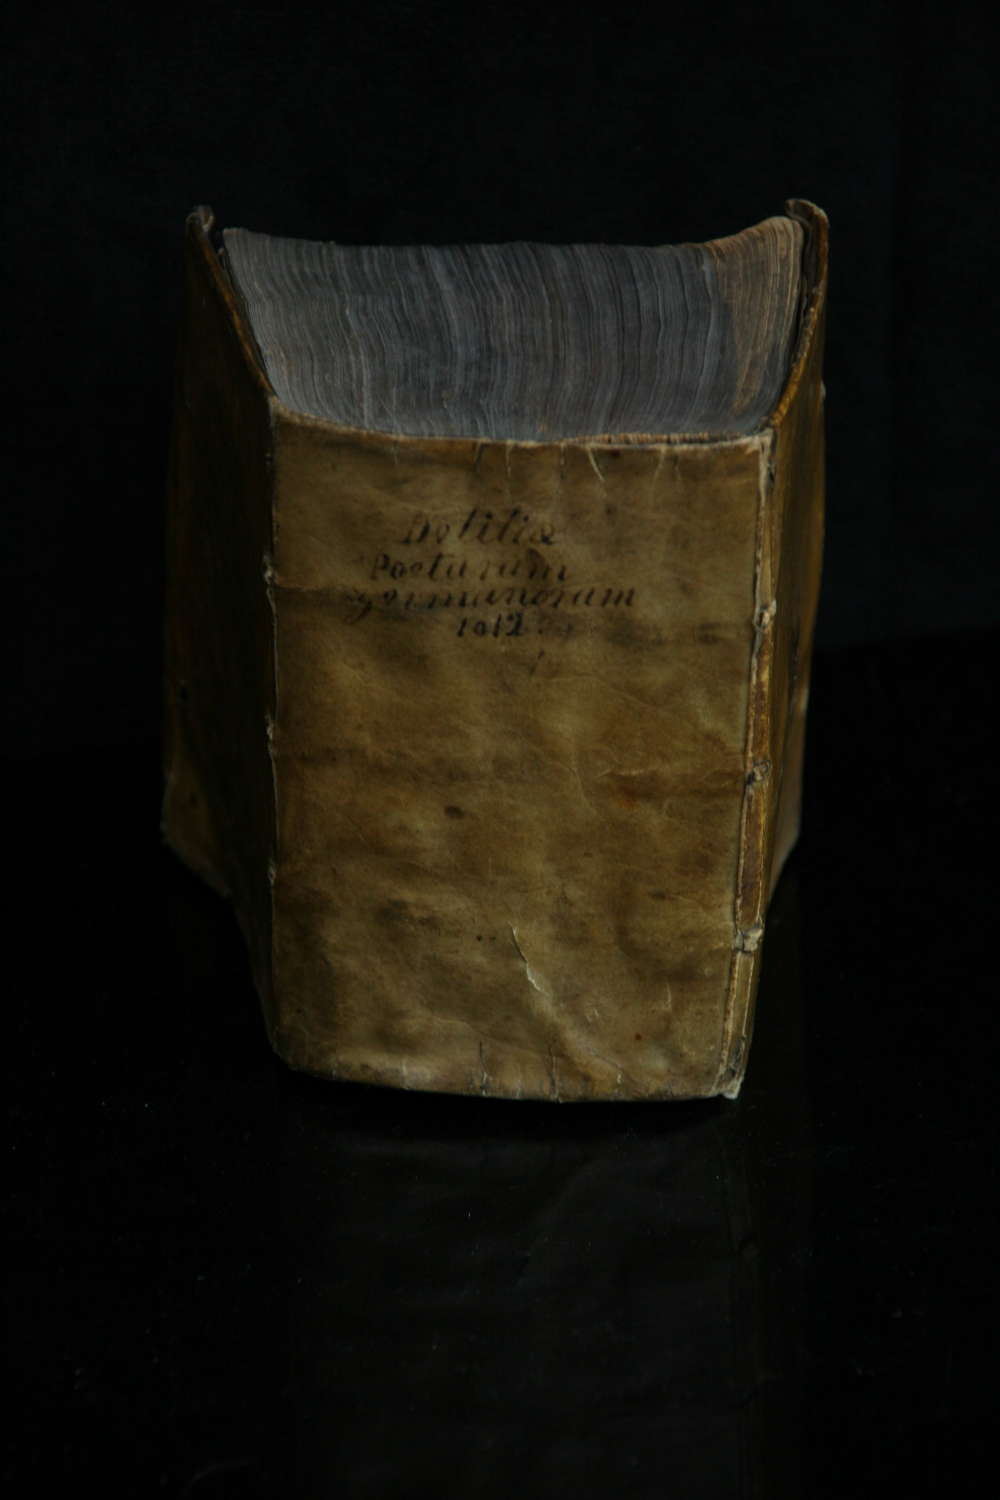 1612 dated Vellum coated Latin Poetry Book